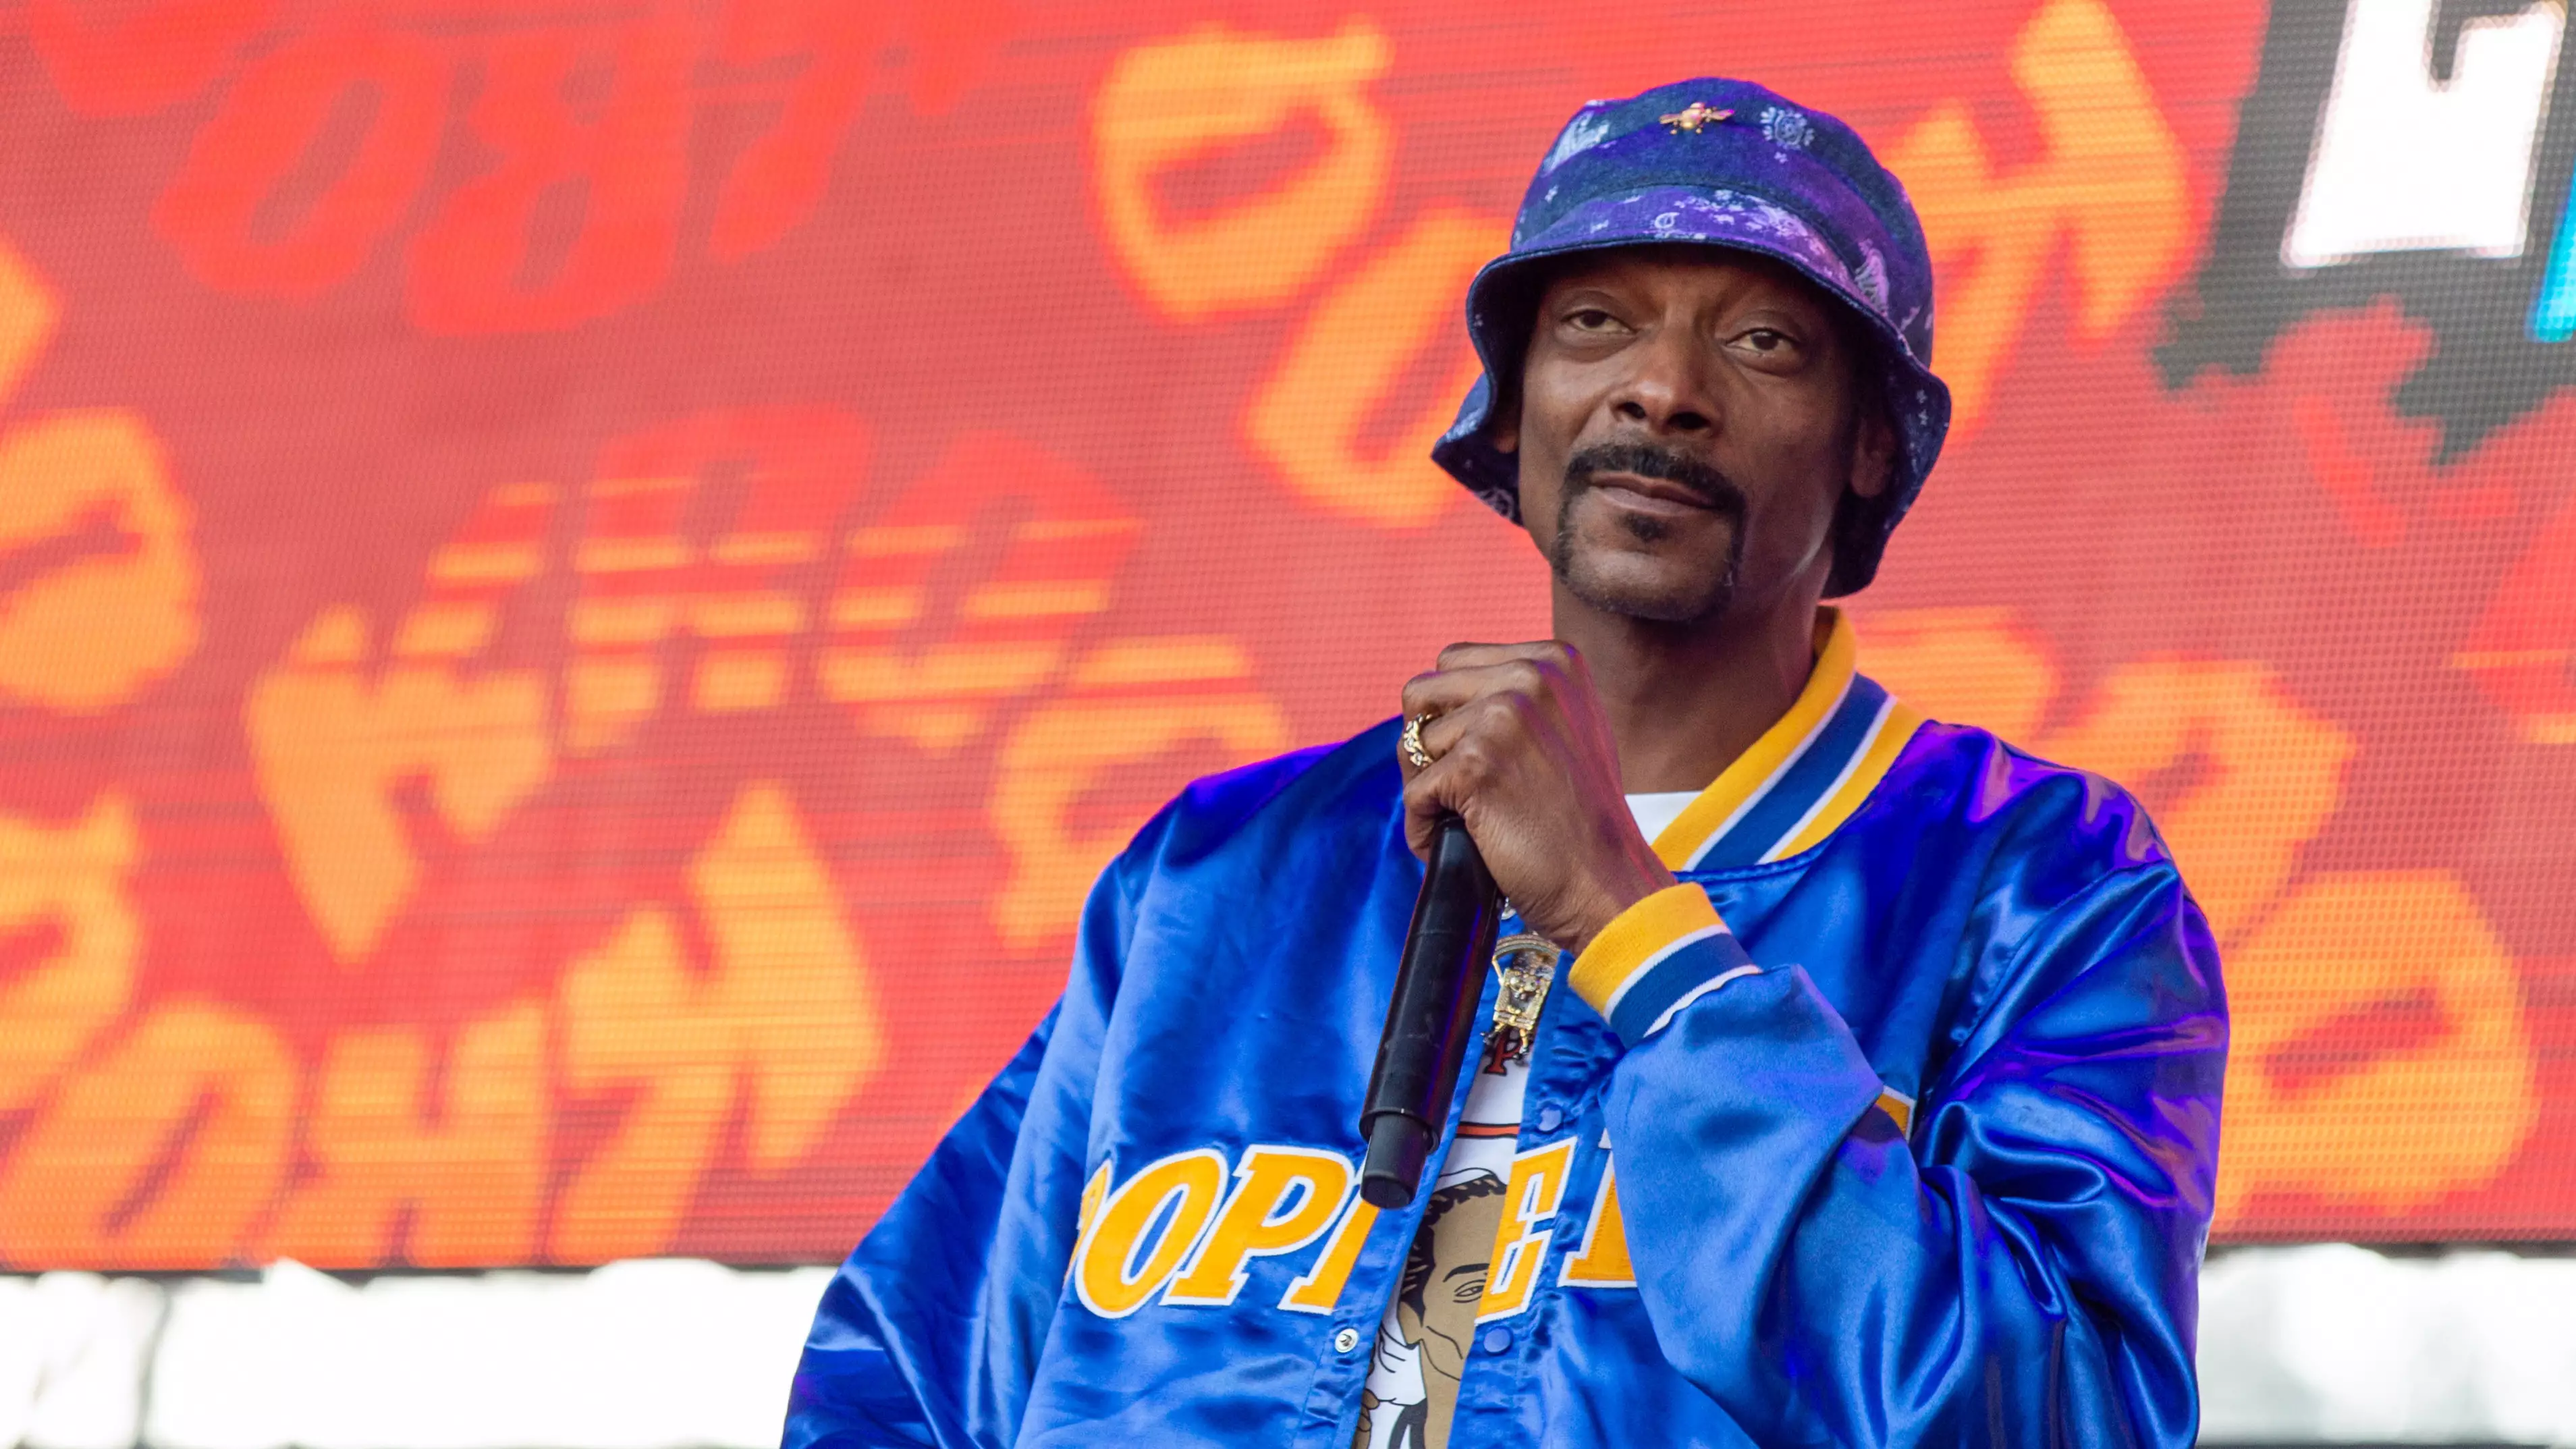 Snoop Dogg Demands Equal Pay For US Women's Football Team